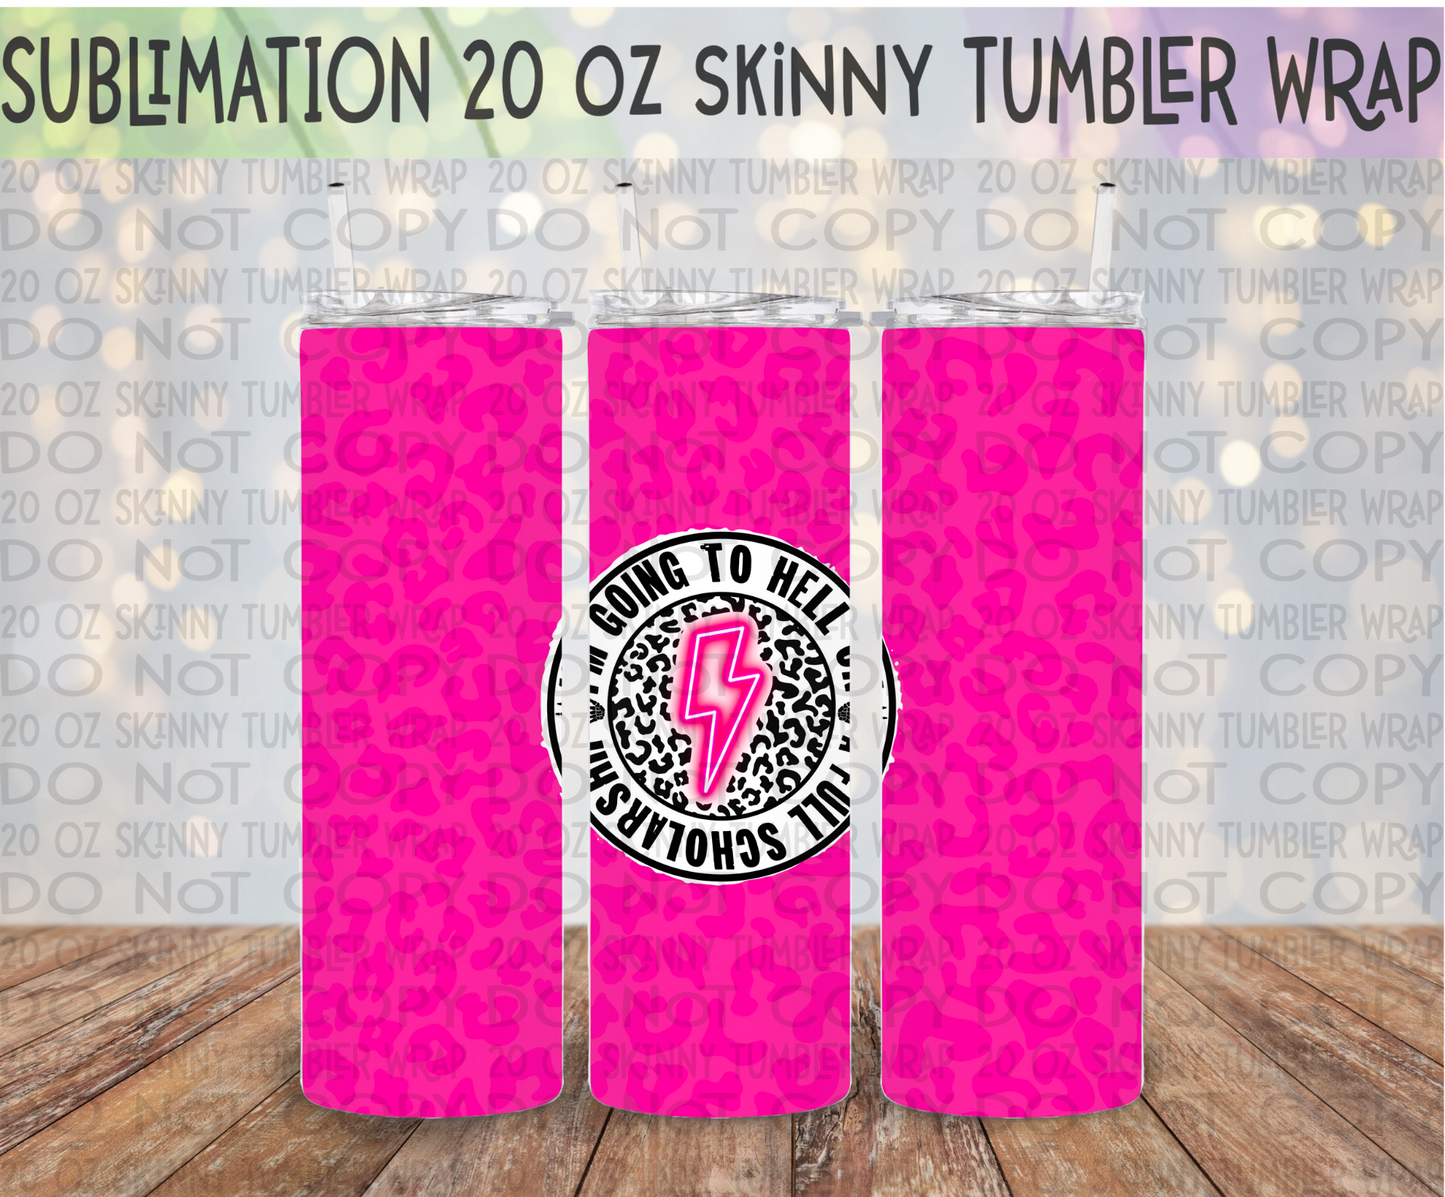 I'm Going to Hell on a Full Scholarship 20 Oz Skinny Tumbler Wrap - Sublimation Transfer - RTS